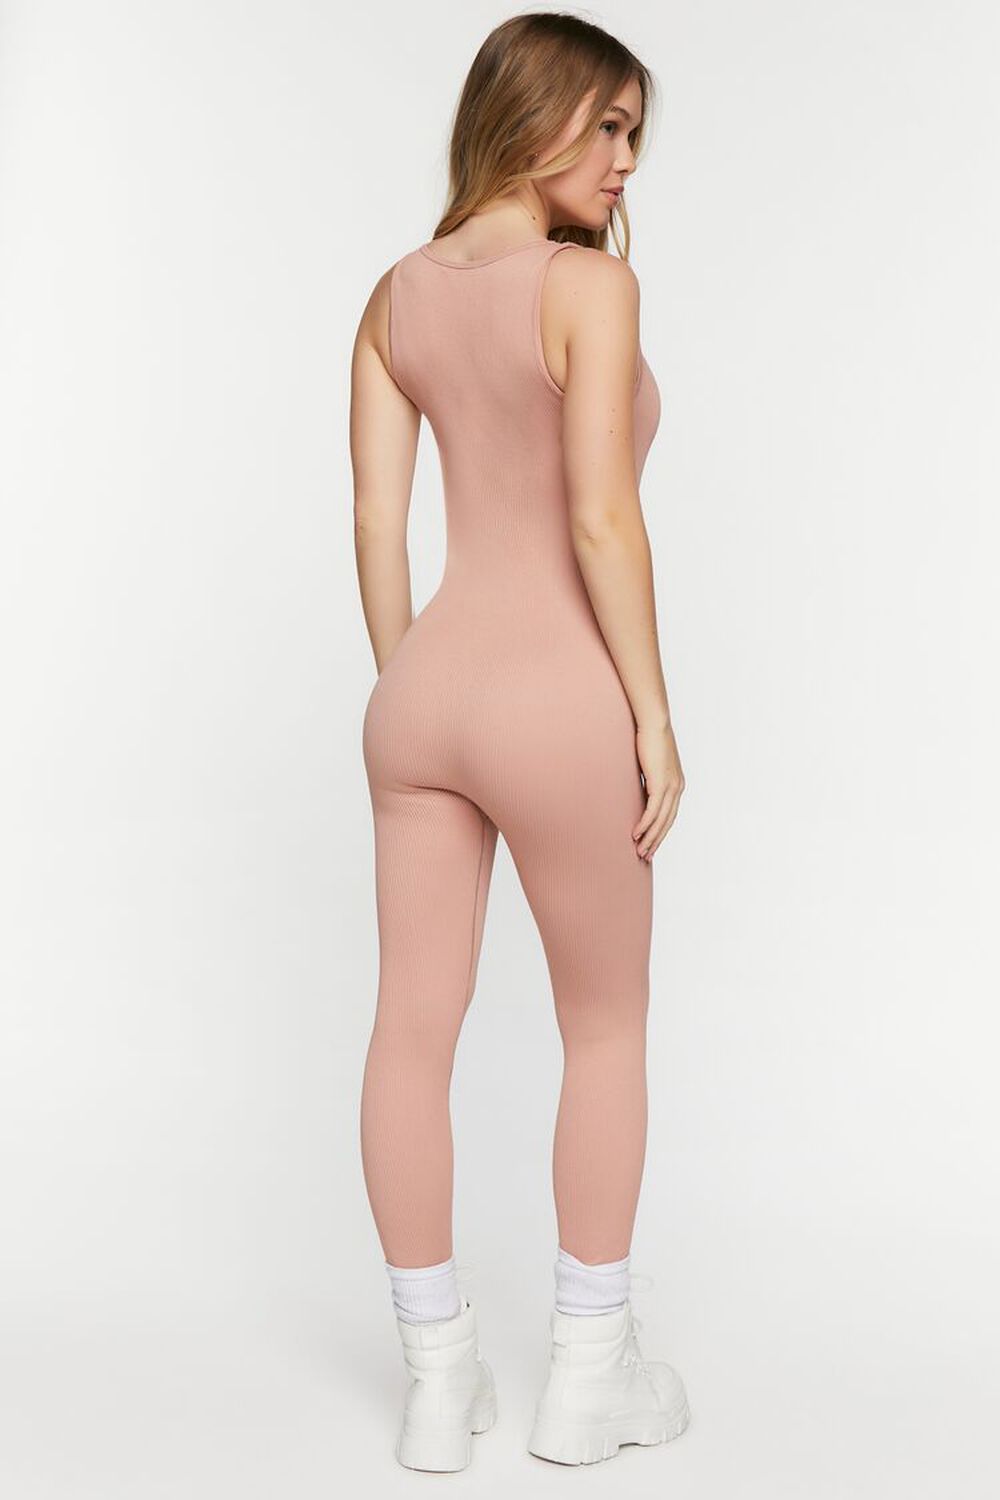 NUDE PINK Seamless Plunging Jumpsuit, image 3